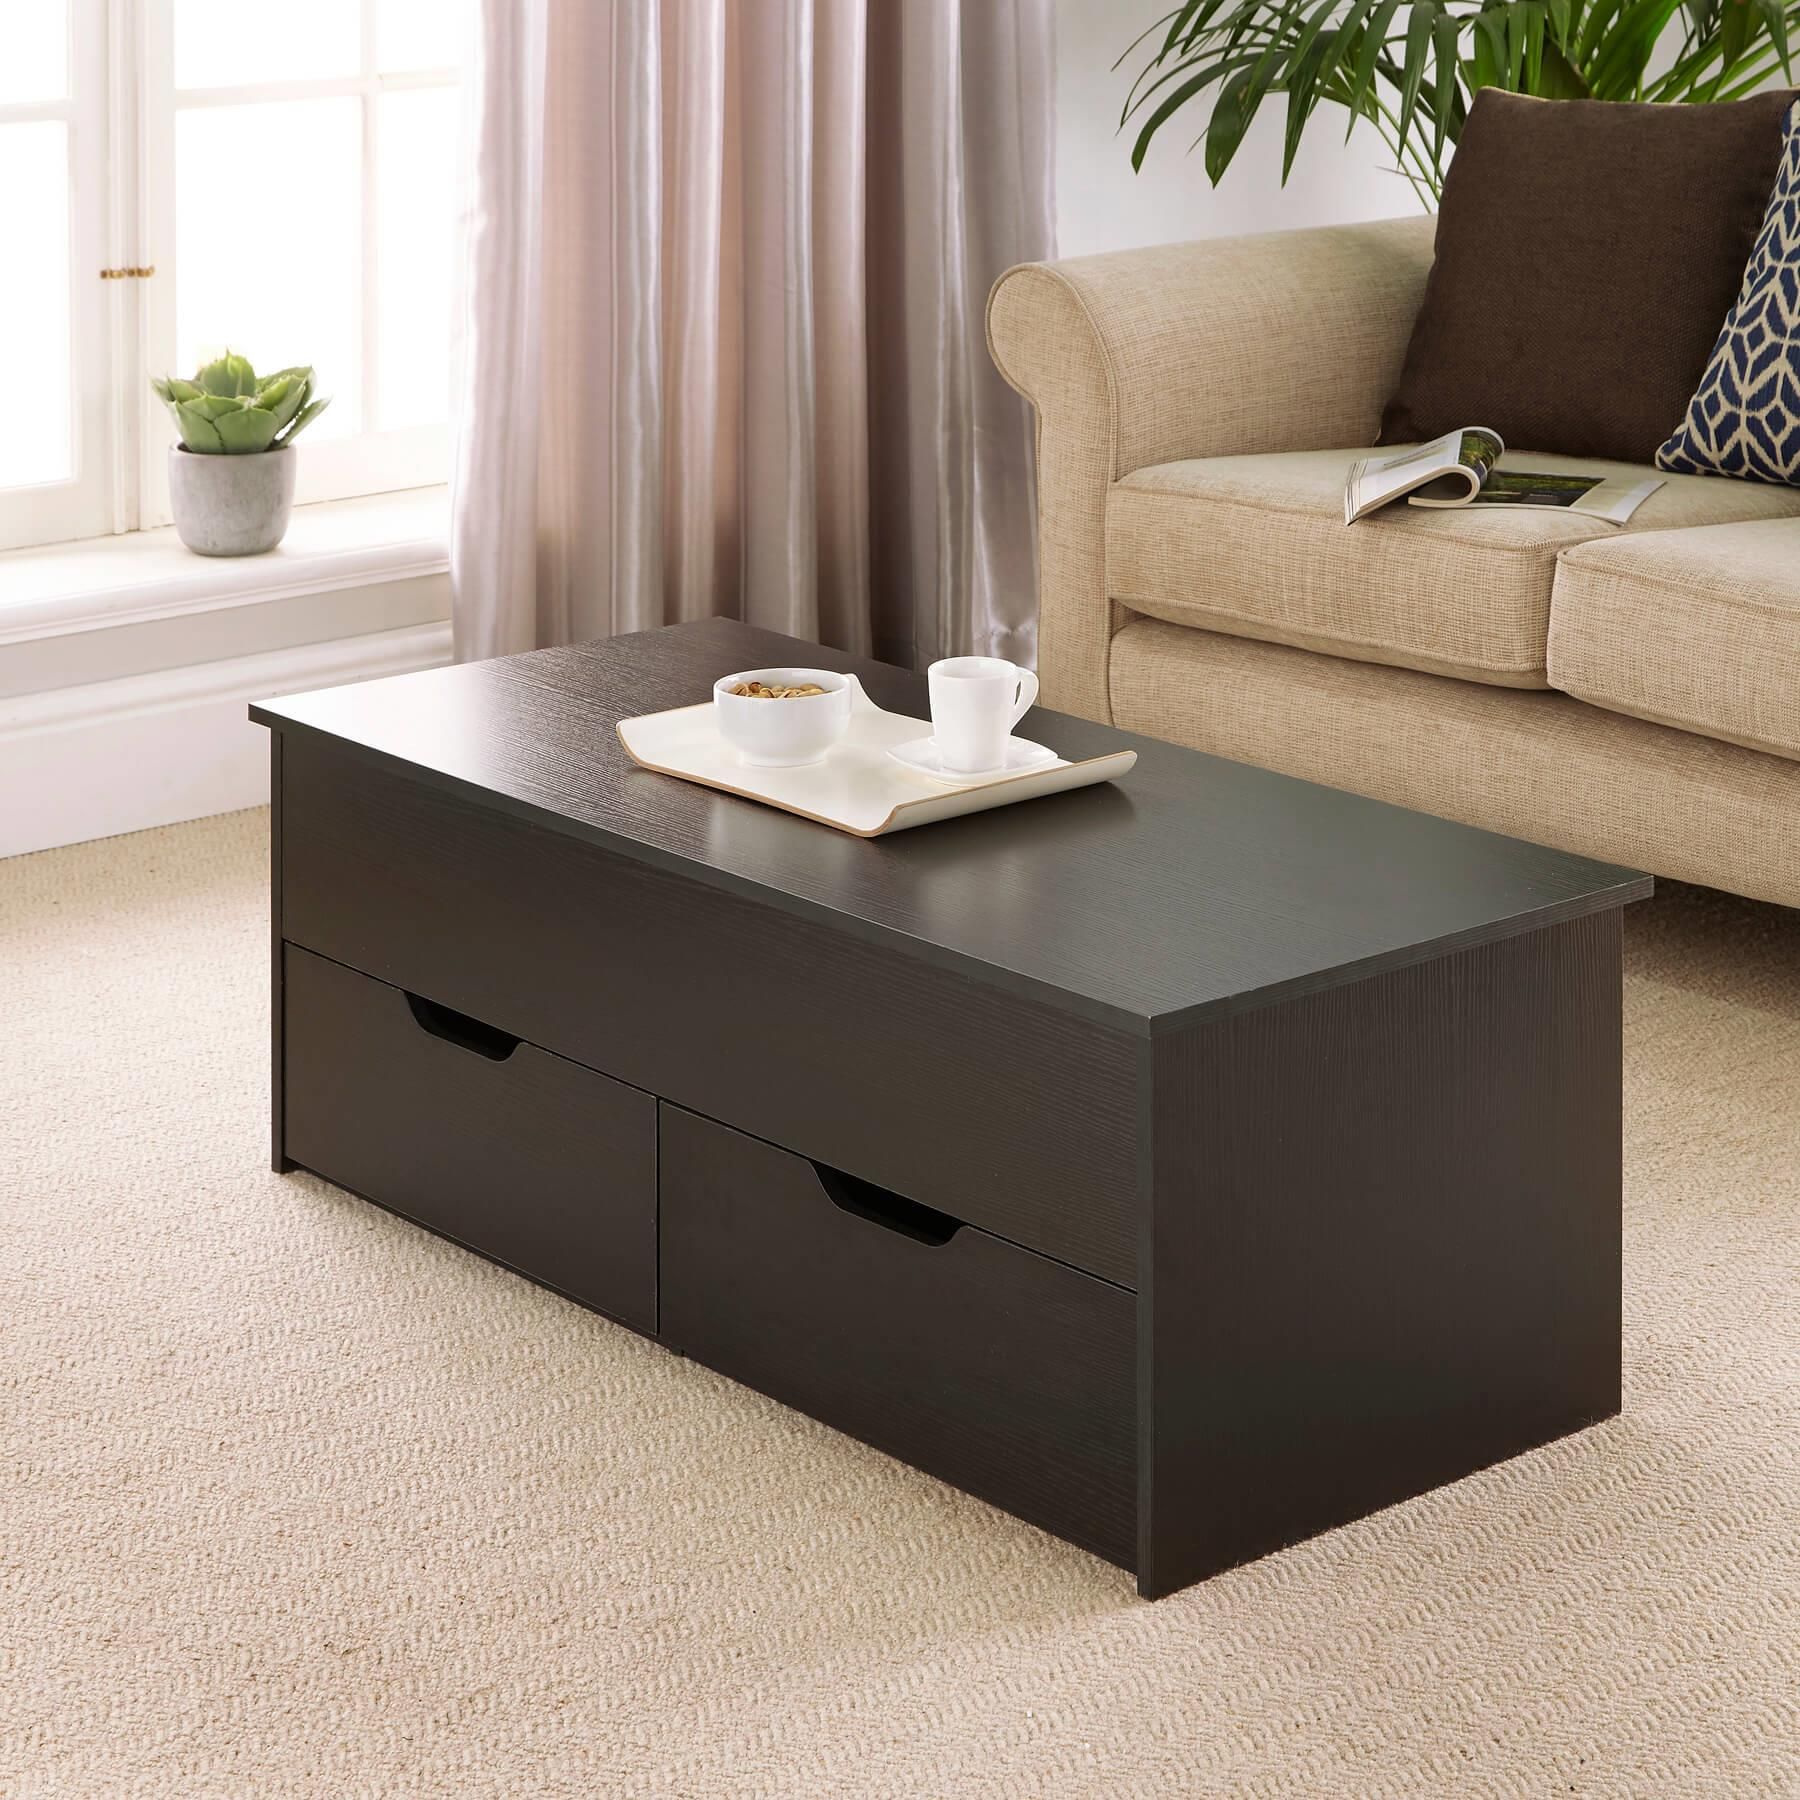 Black Wooden Coffee Table With Lift Up Top And 2 Large Storage Drawers Inside Lift Top Coffee Tables With Storage Drawers (Gallery 3 of 20)